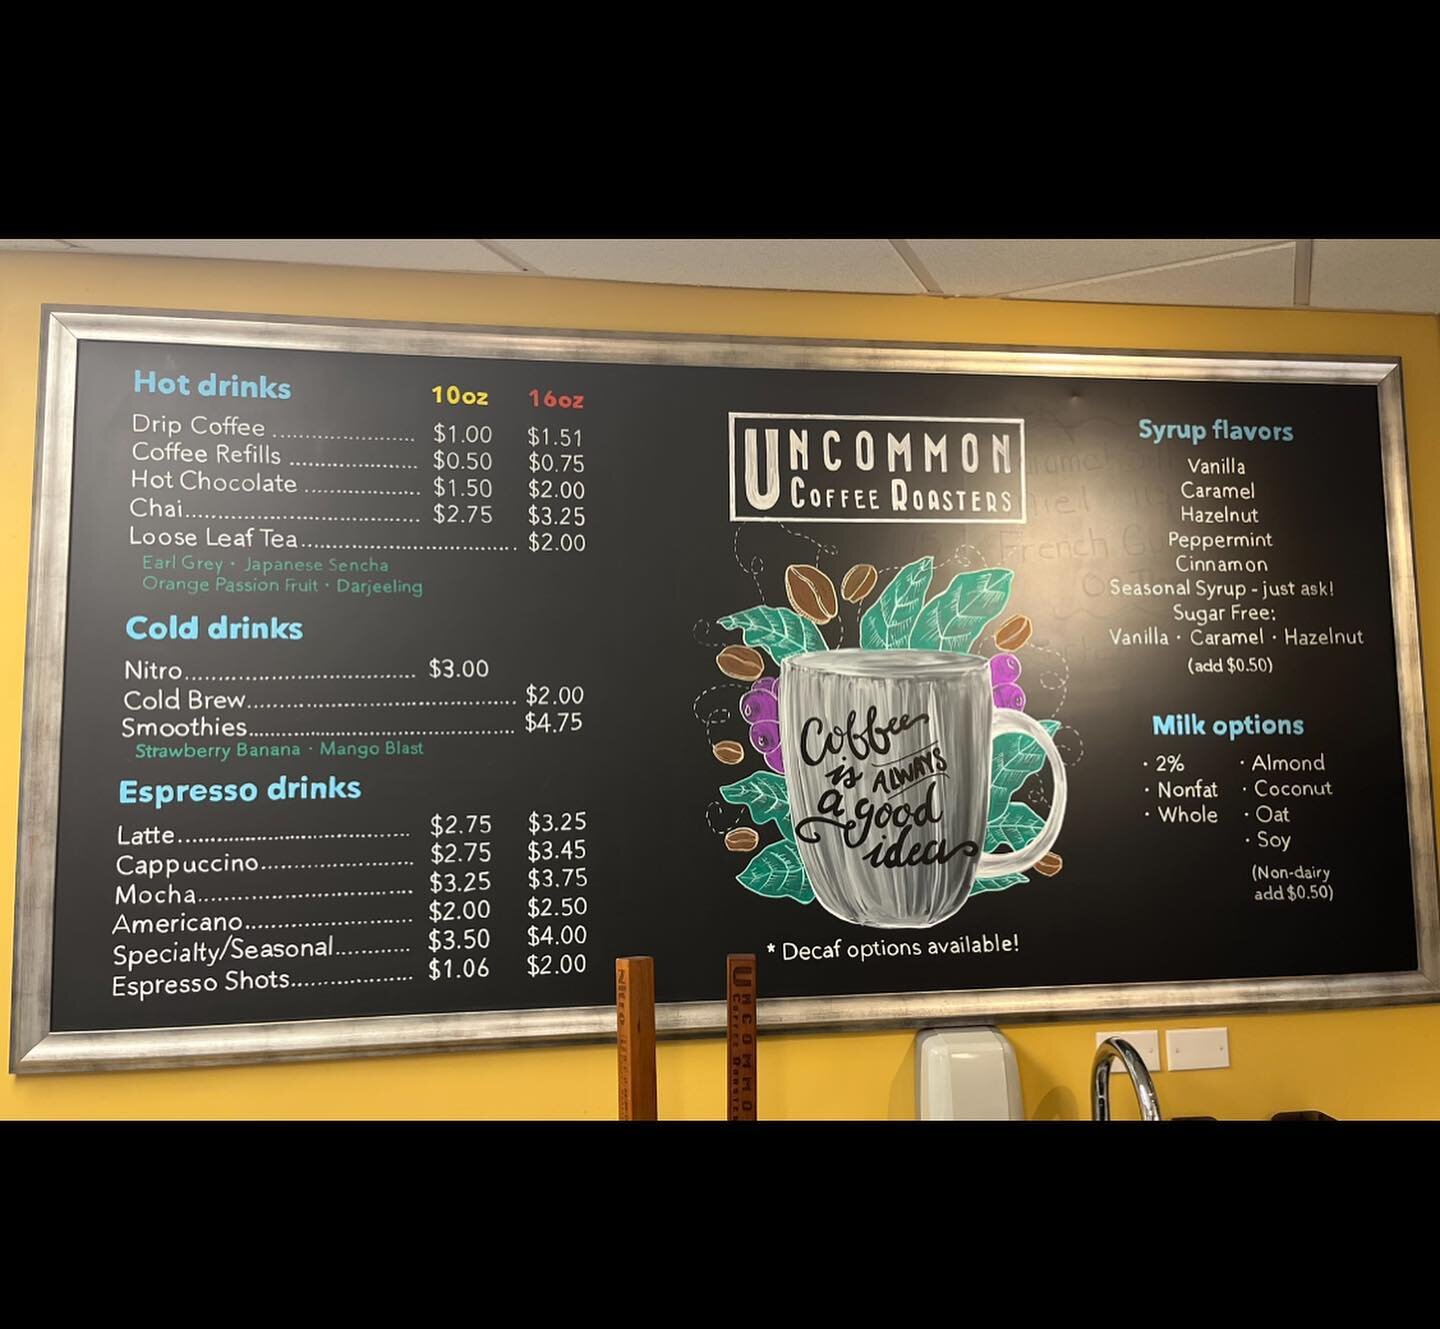 Here is the final final of the chalkboard after a couple tweaks and adding the quote on the cup! I&rsquo;m really so thankful to be able to do these projects in my community 💙
.
Thank you again to Dan and crew at @whirlpoolcorp for asking me to crea